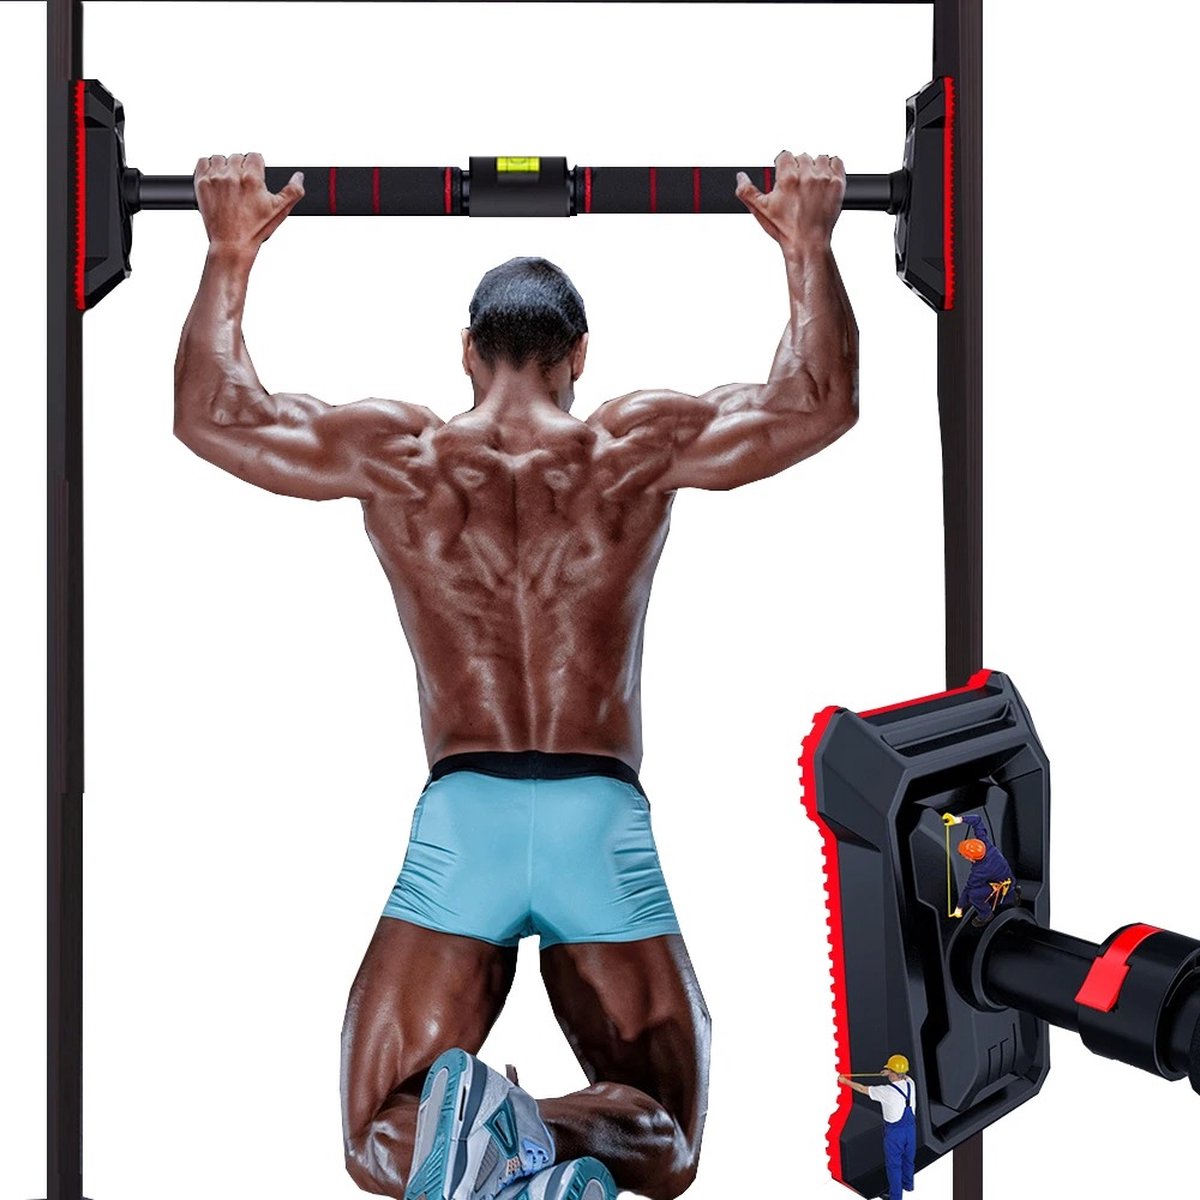 Empire's Product 350Kg Verstelbare Pull Up Bar - Oefening Thuis - Workout Gym - Chin Up - Training Bar - Sport Fitness Deur - Horizontale Balken 70-95cm